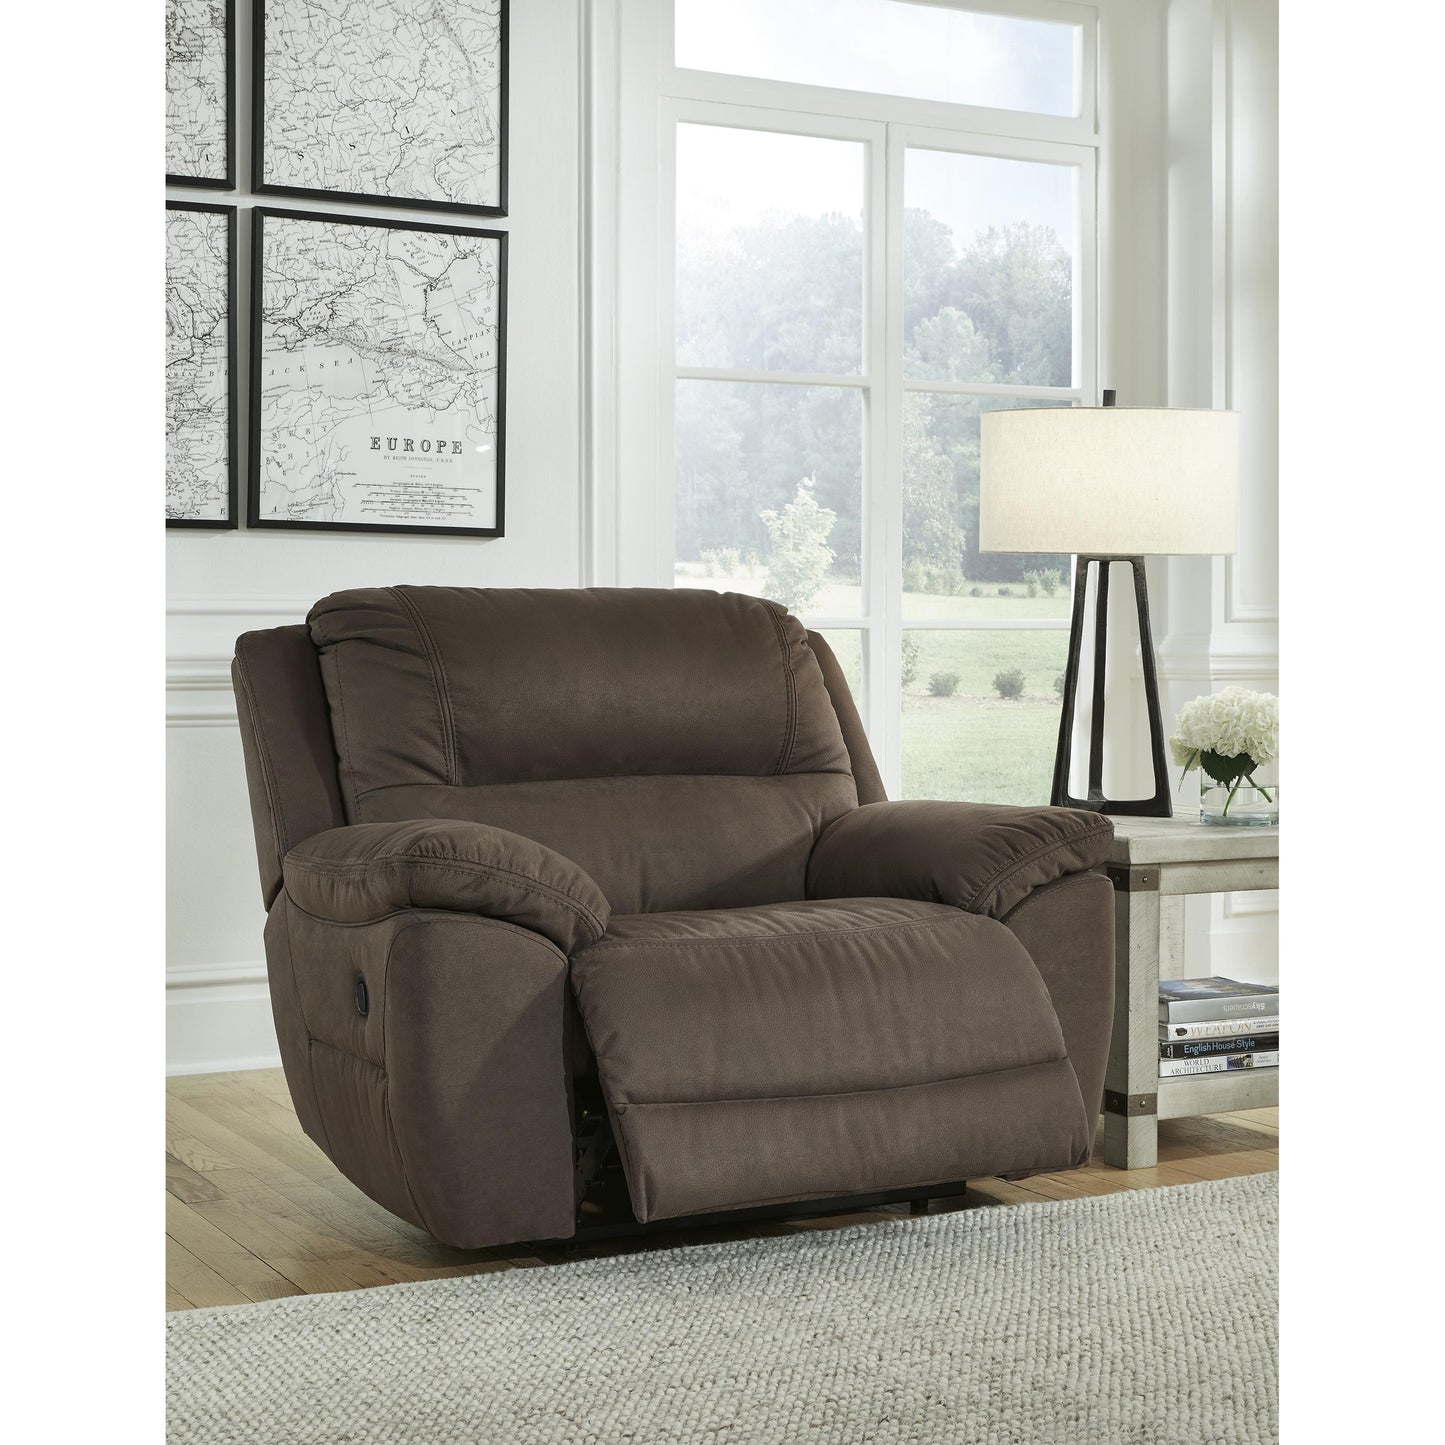 Signature Design by Ashley Next-Gen Gaucho Leather Look Recliner with Wall Recline 5420452 IMAGE 7